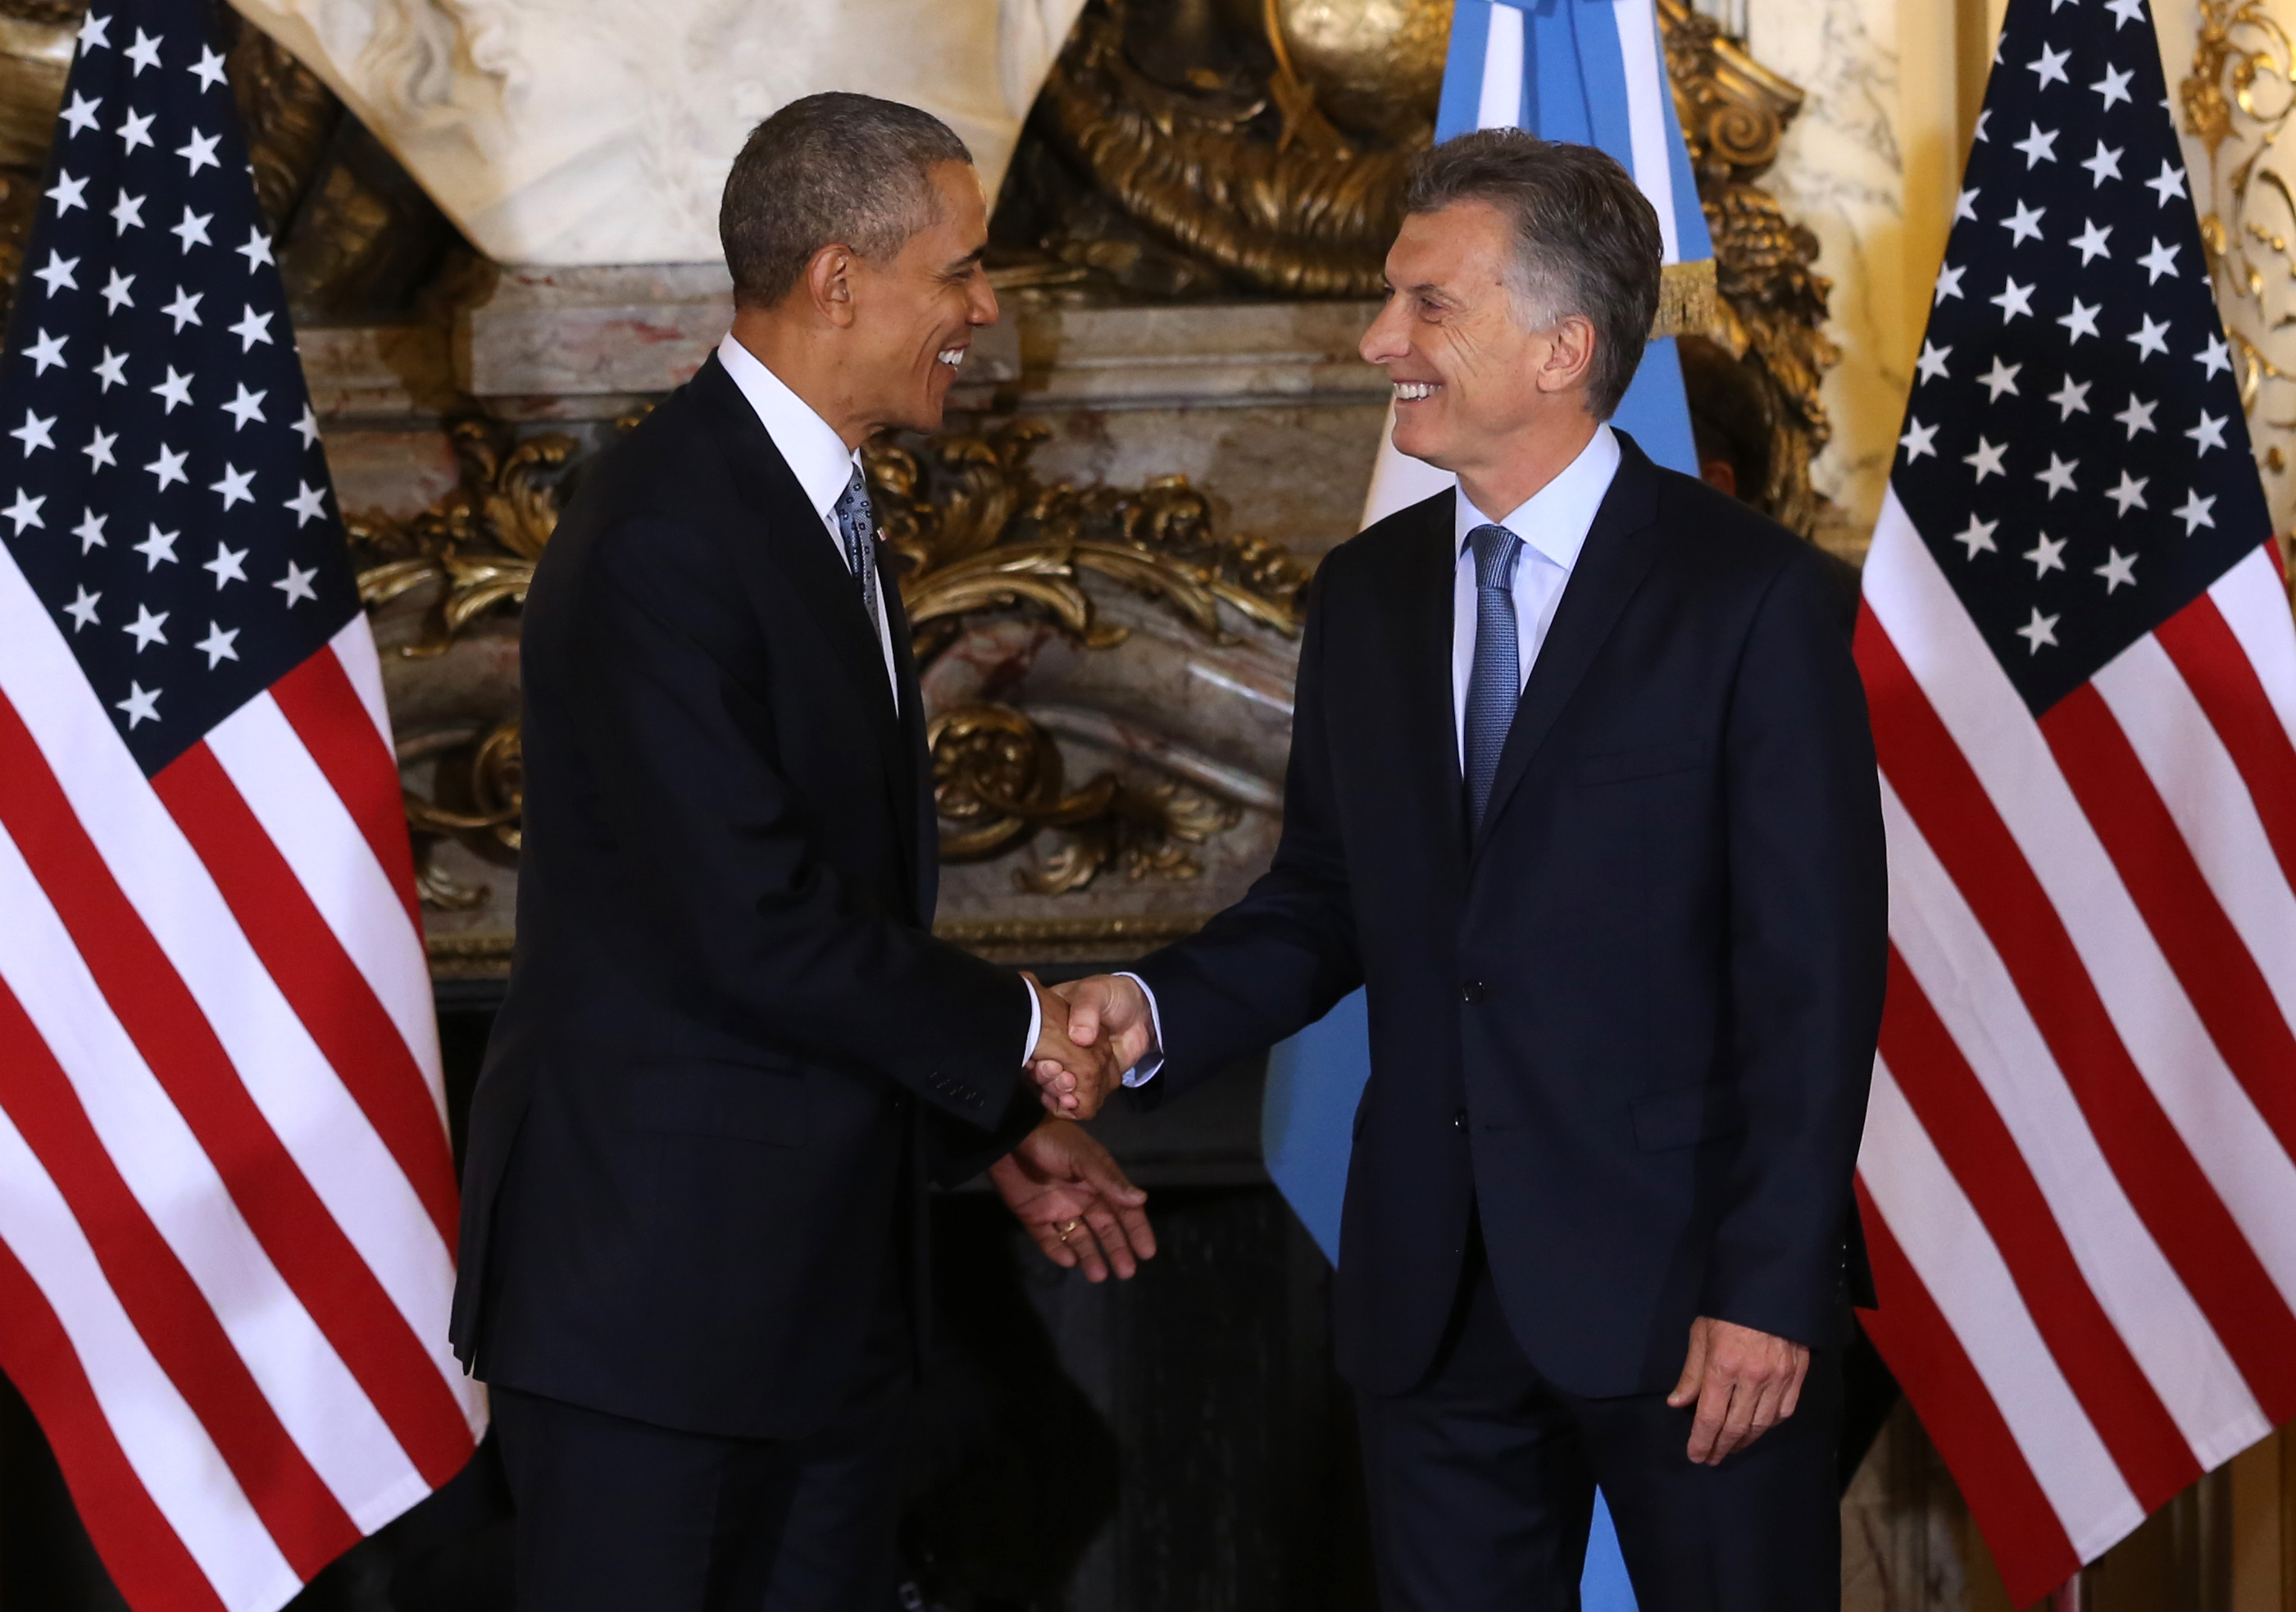 Macri and Obama shown engaged in a warm handshake during the U.S. president's visit to Argentina.